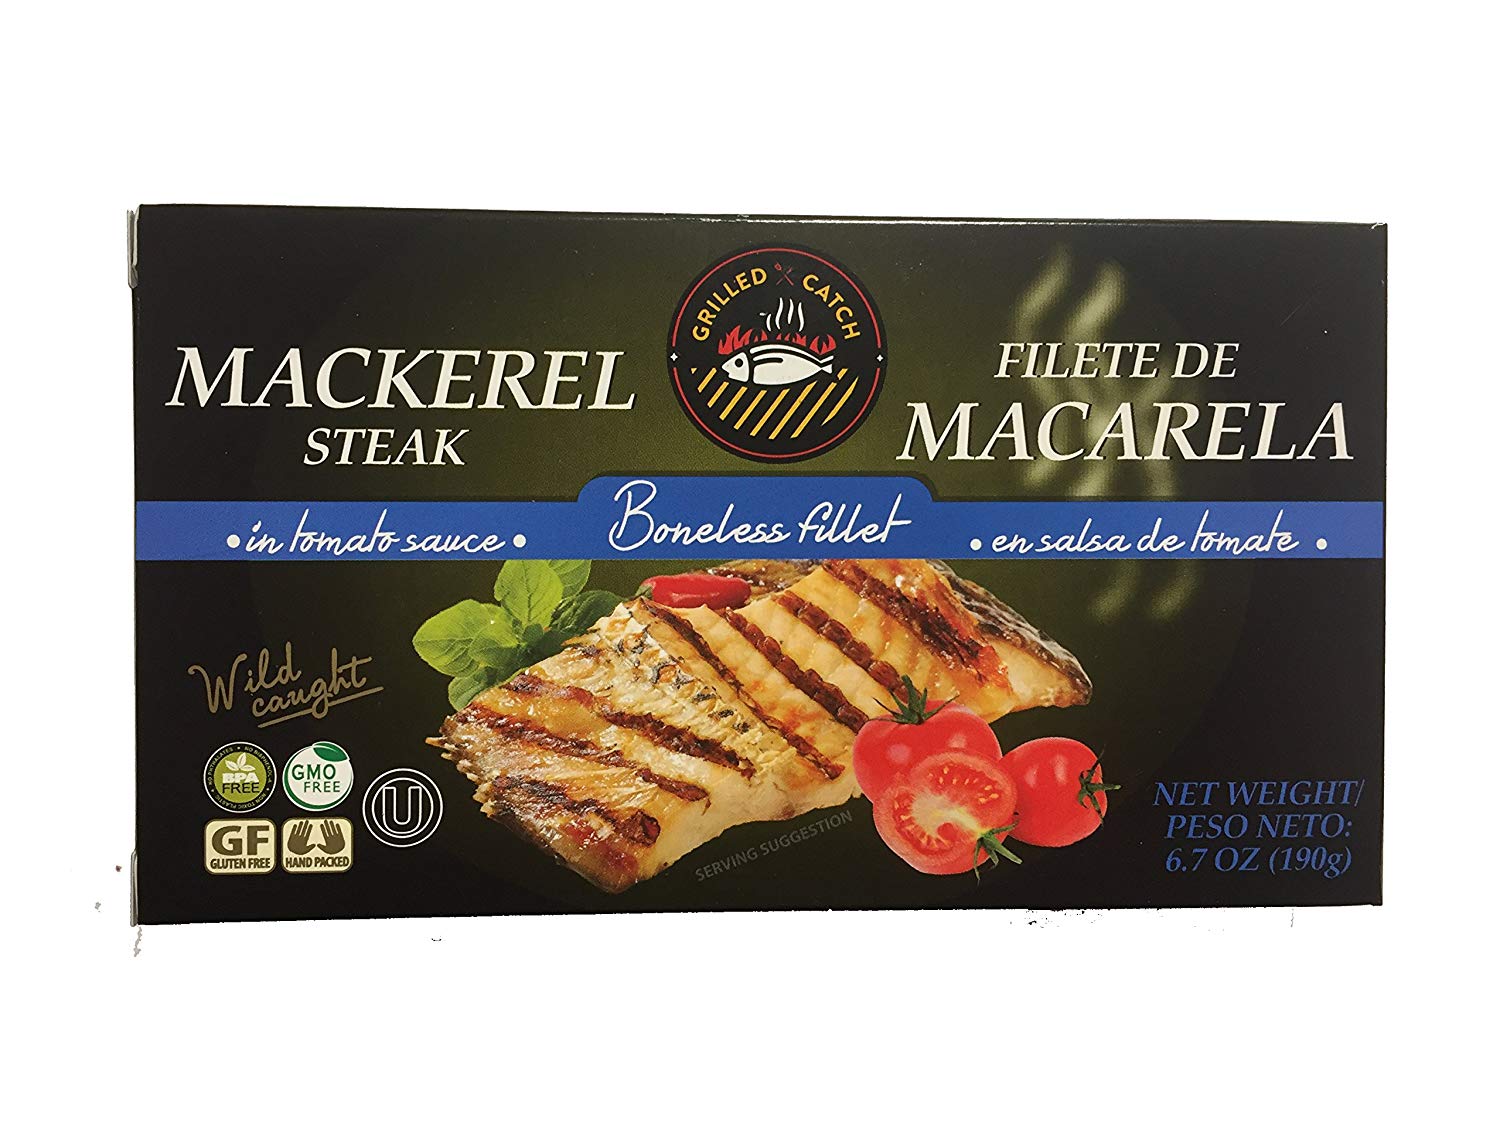 GRILLED CATCH: Mackerel Steak in Tomato Sauce, 6.7 oz - Vending Business Solutions